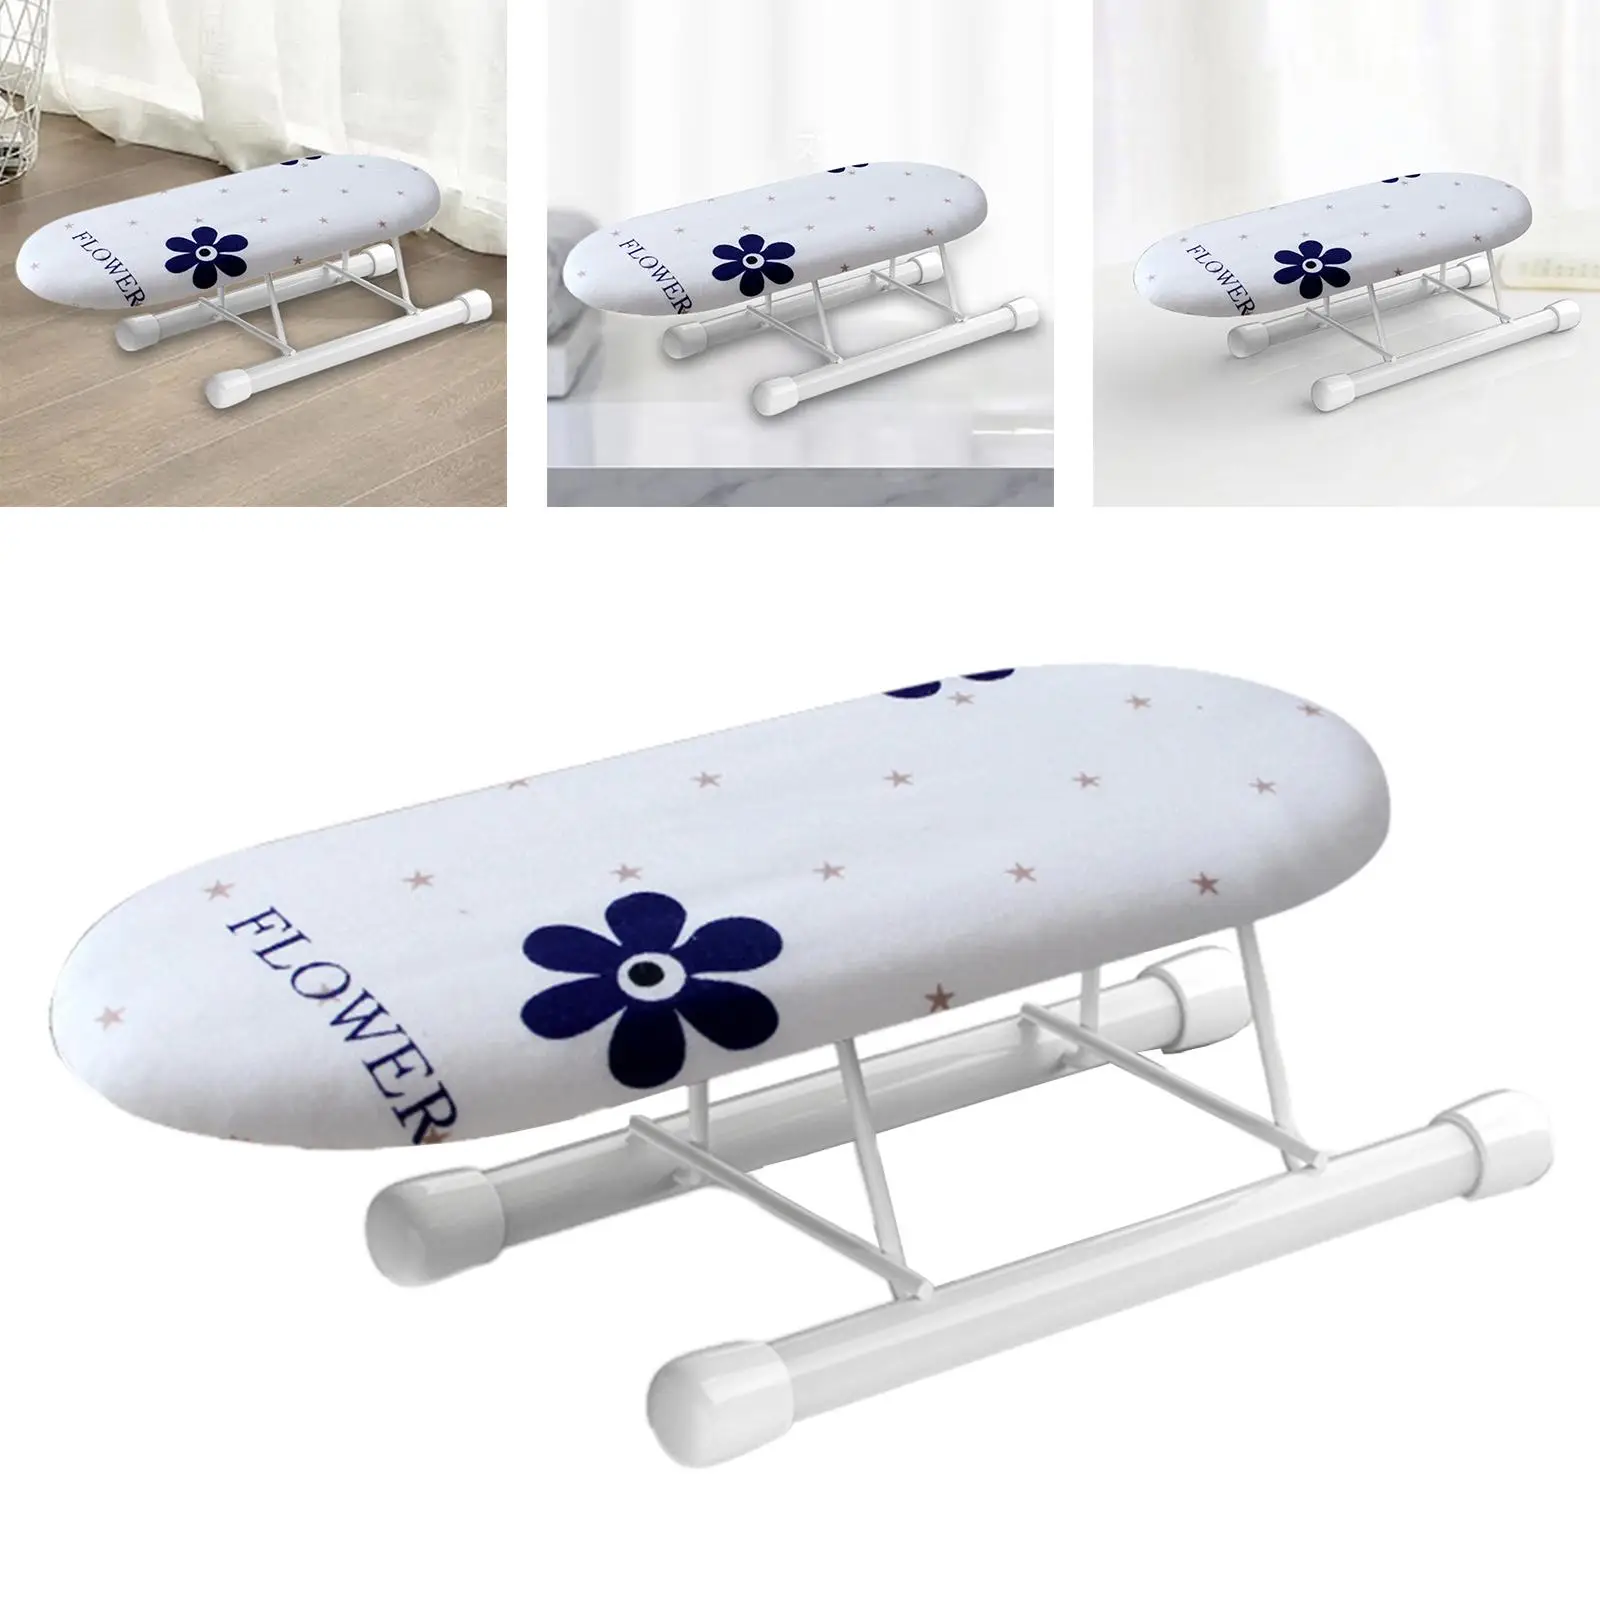 Steel Ironing Board with Folding Legs Heat Resistant Cover Weight Anti Slip for Laundry Household Room Travel Dorm